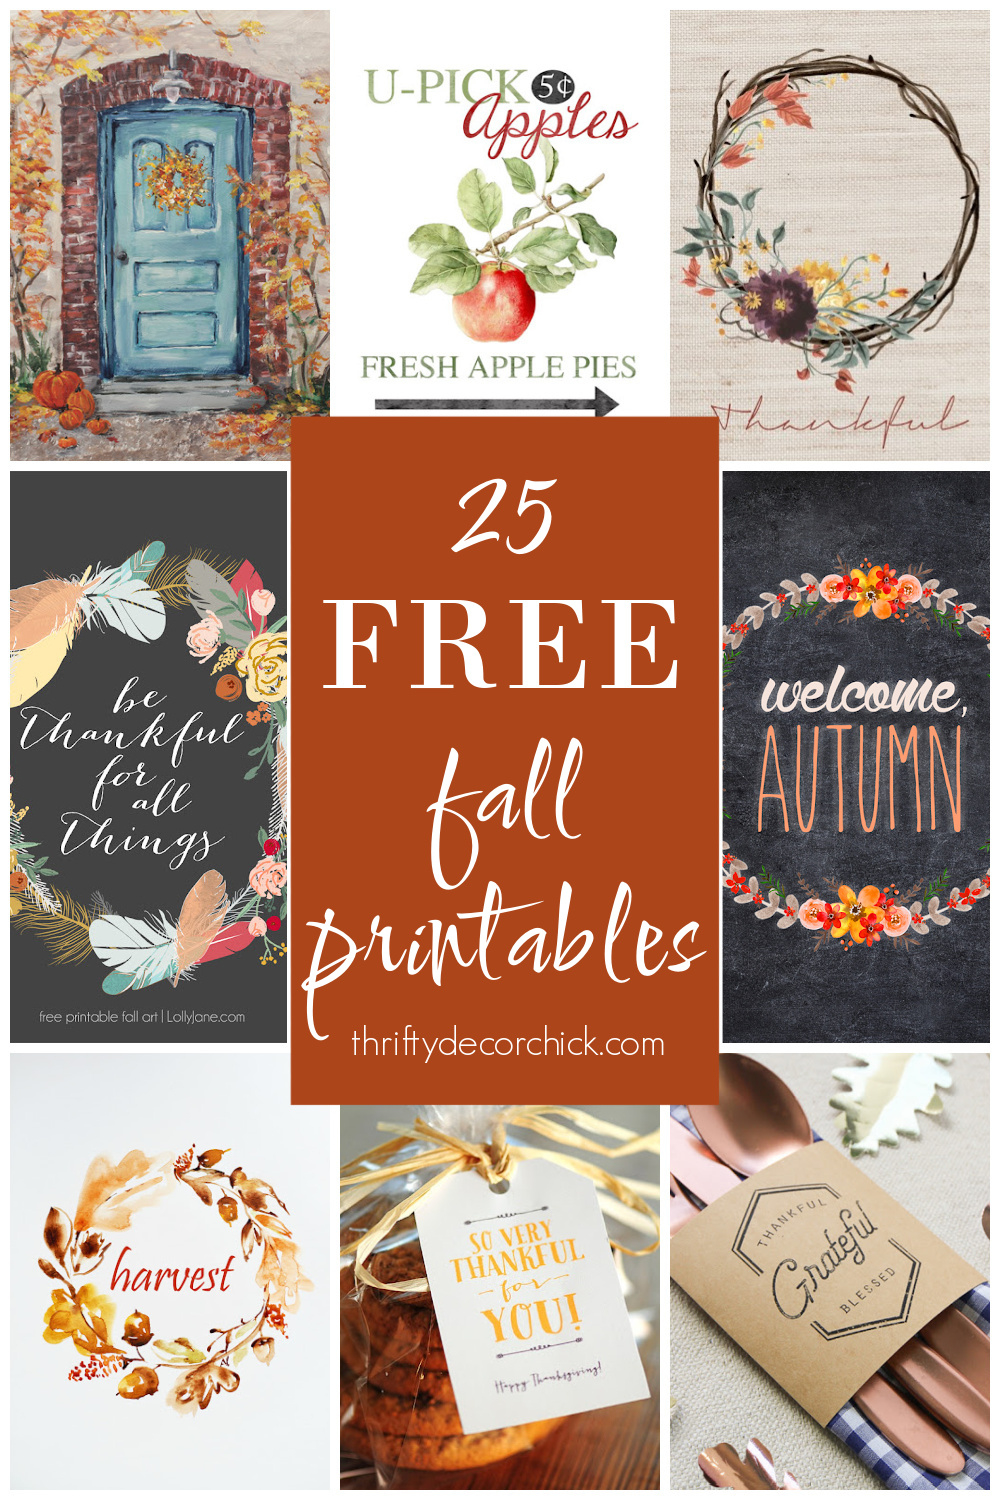 25 Free Fall Printables For Autumn Decorating | Thrifty Decor inside Free October Printables